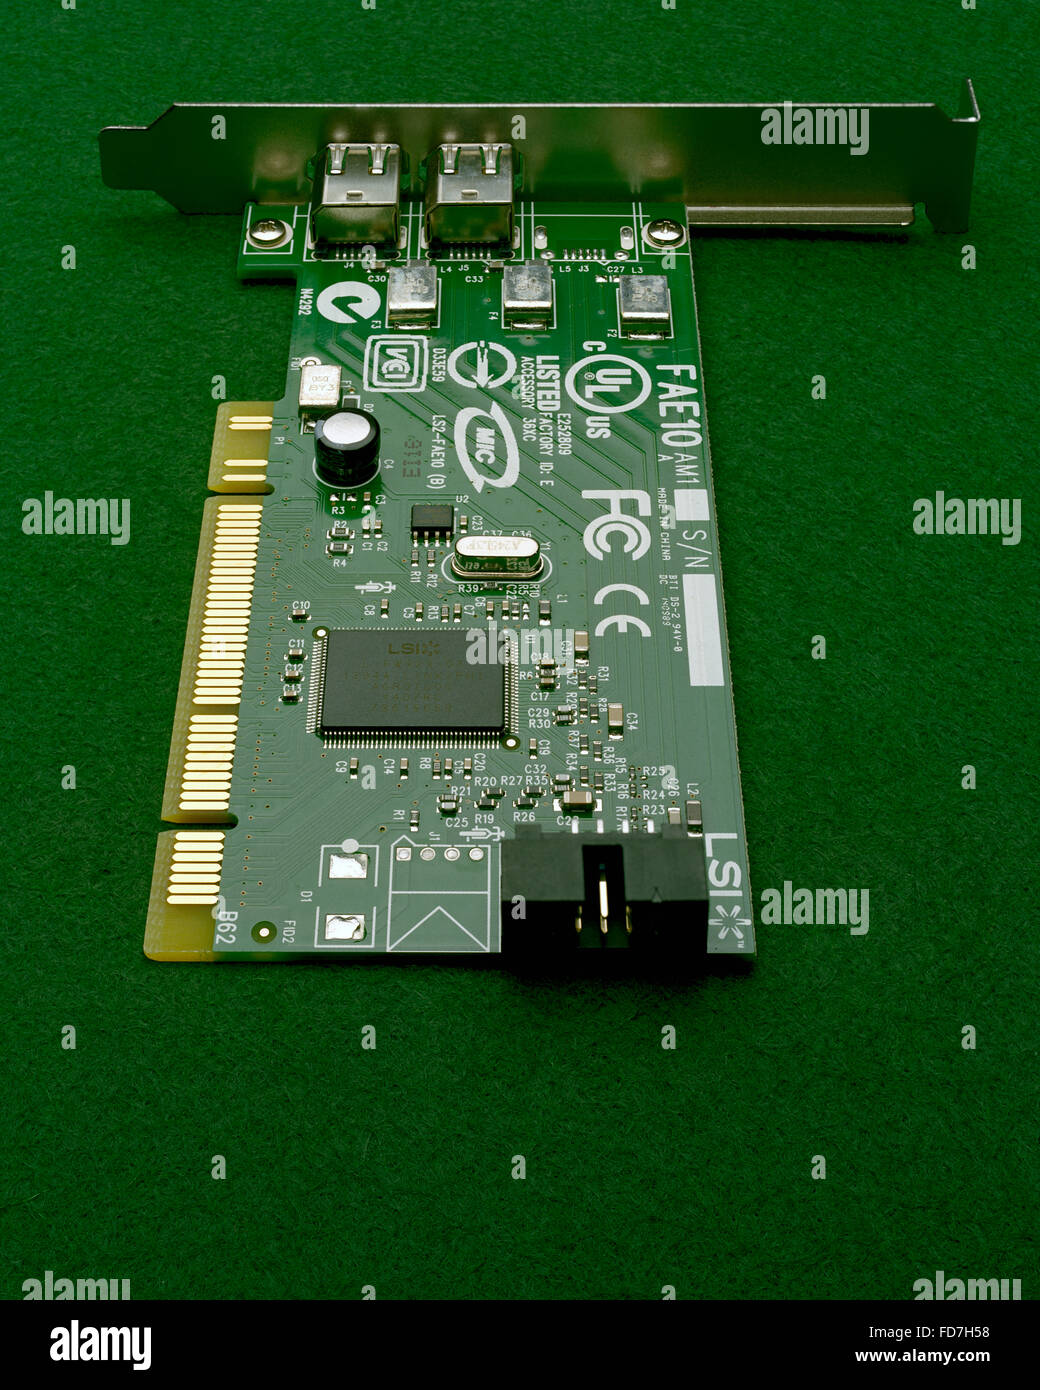 PCI computer expansion card for Firewire connection Stock Photo